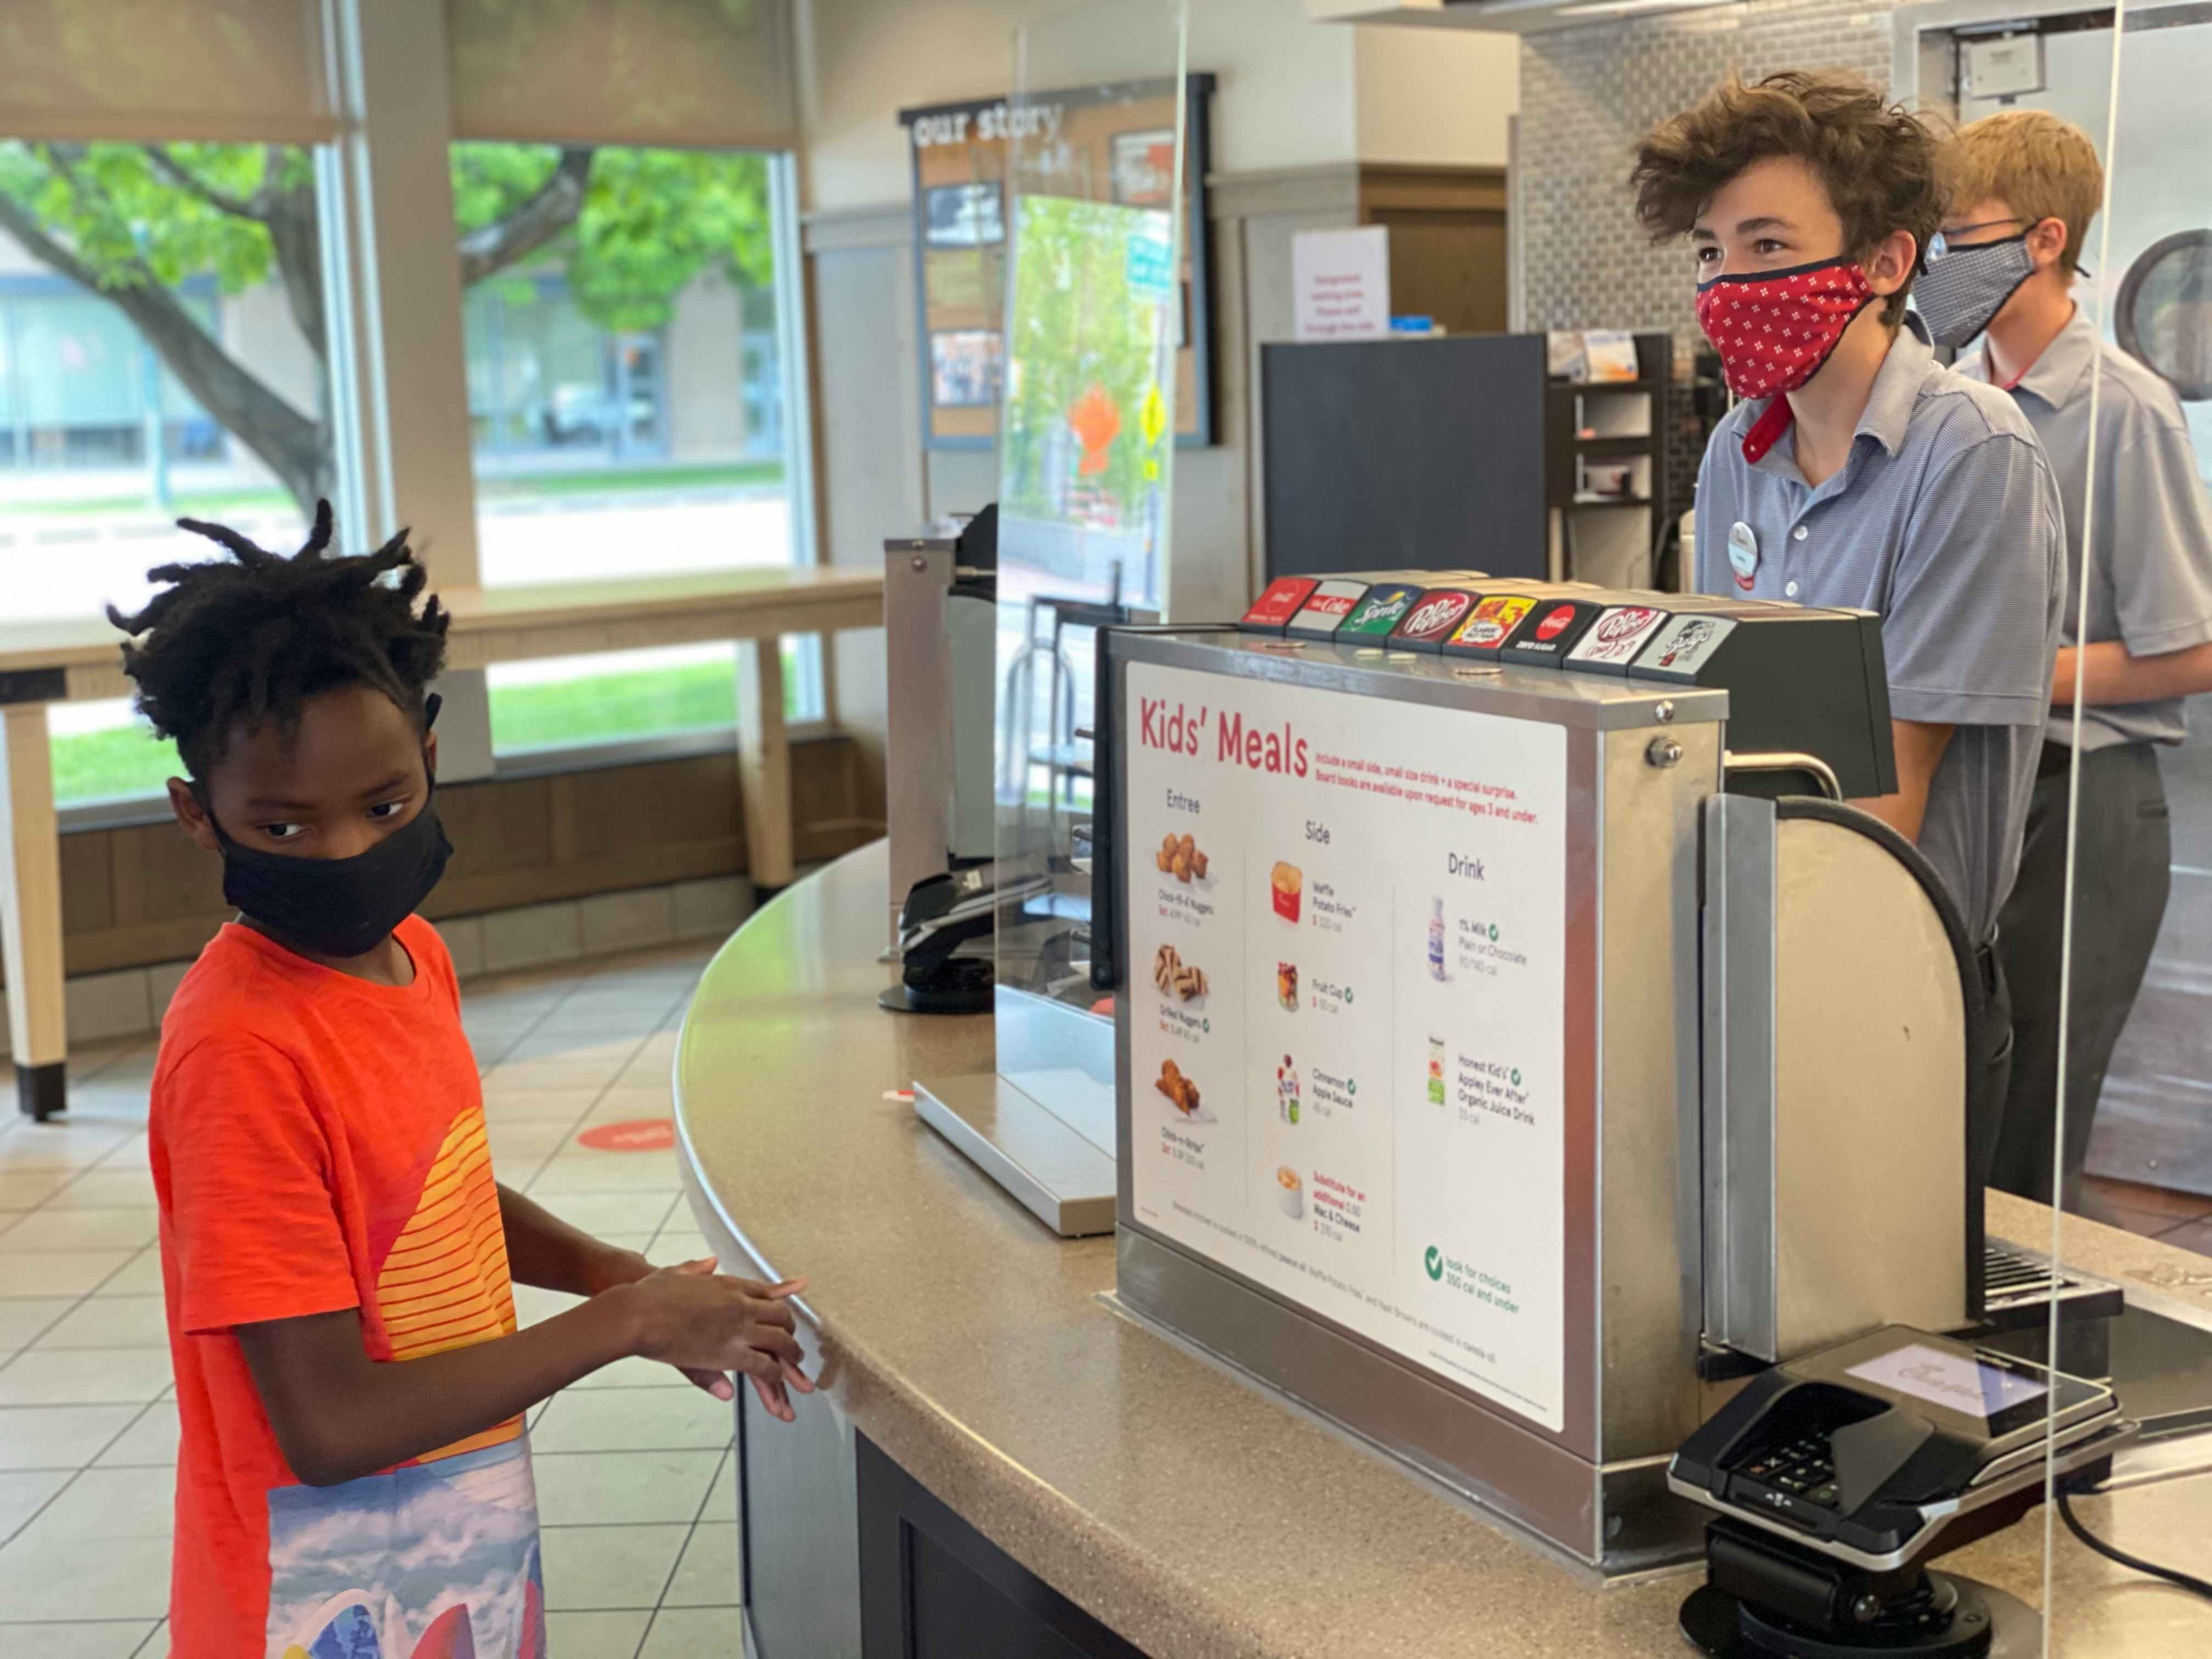 A boy standing at a Chick-fil-A counter with employees behind it.